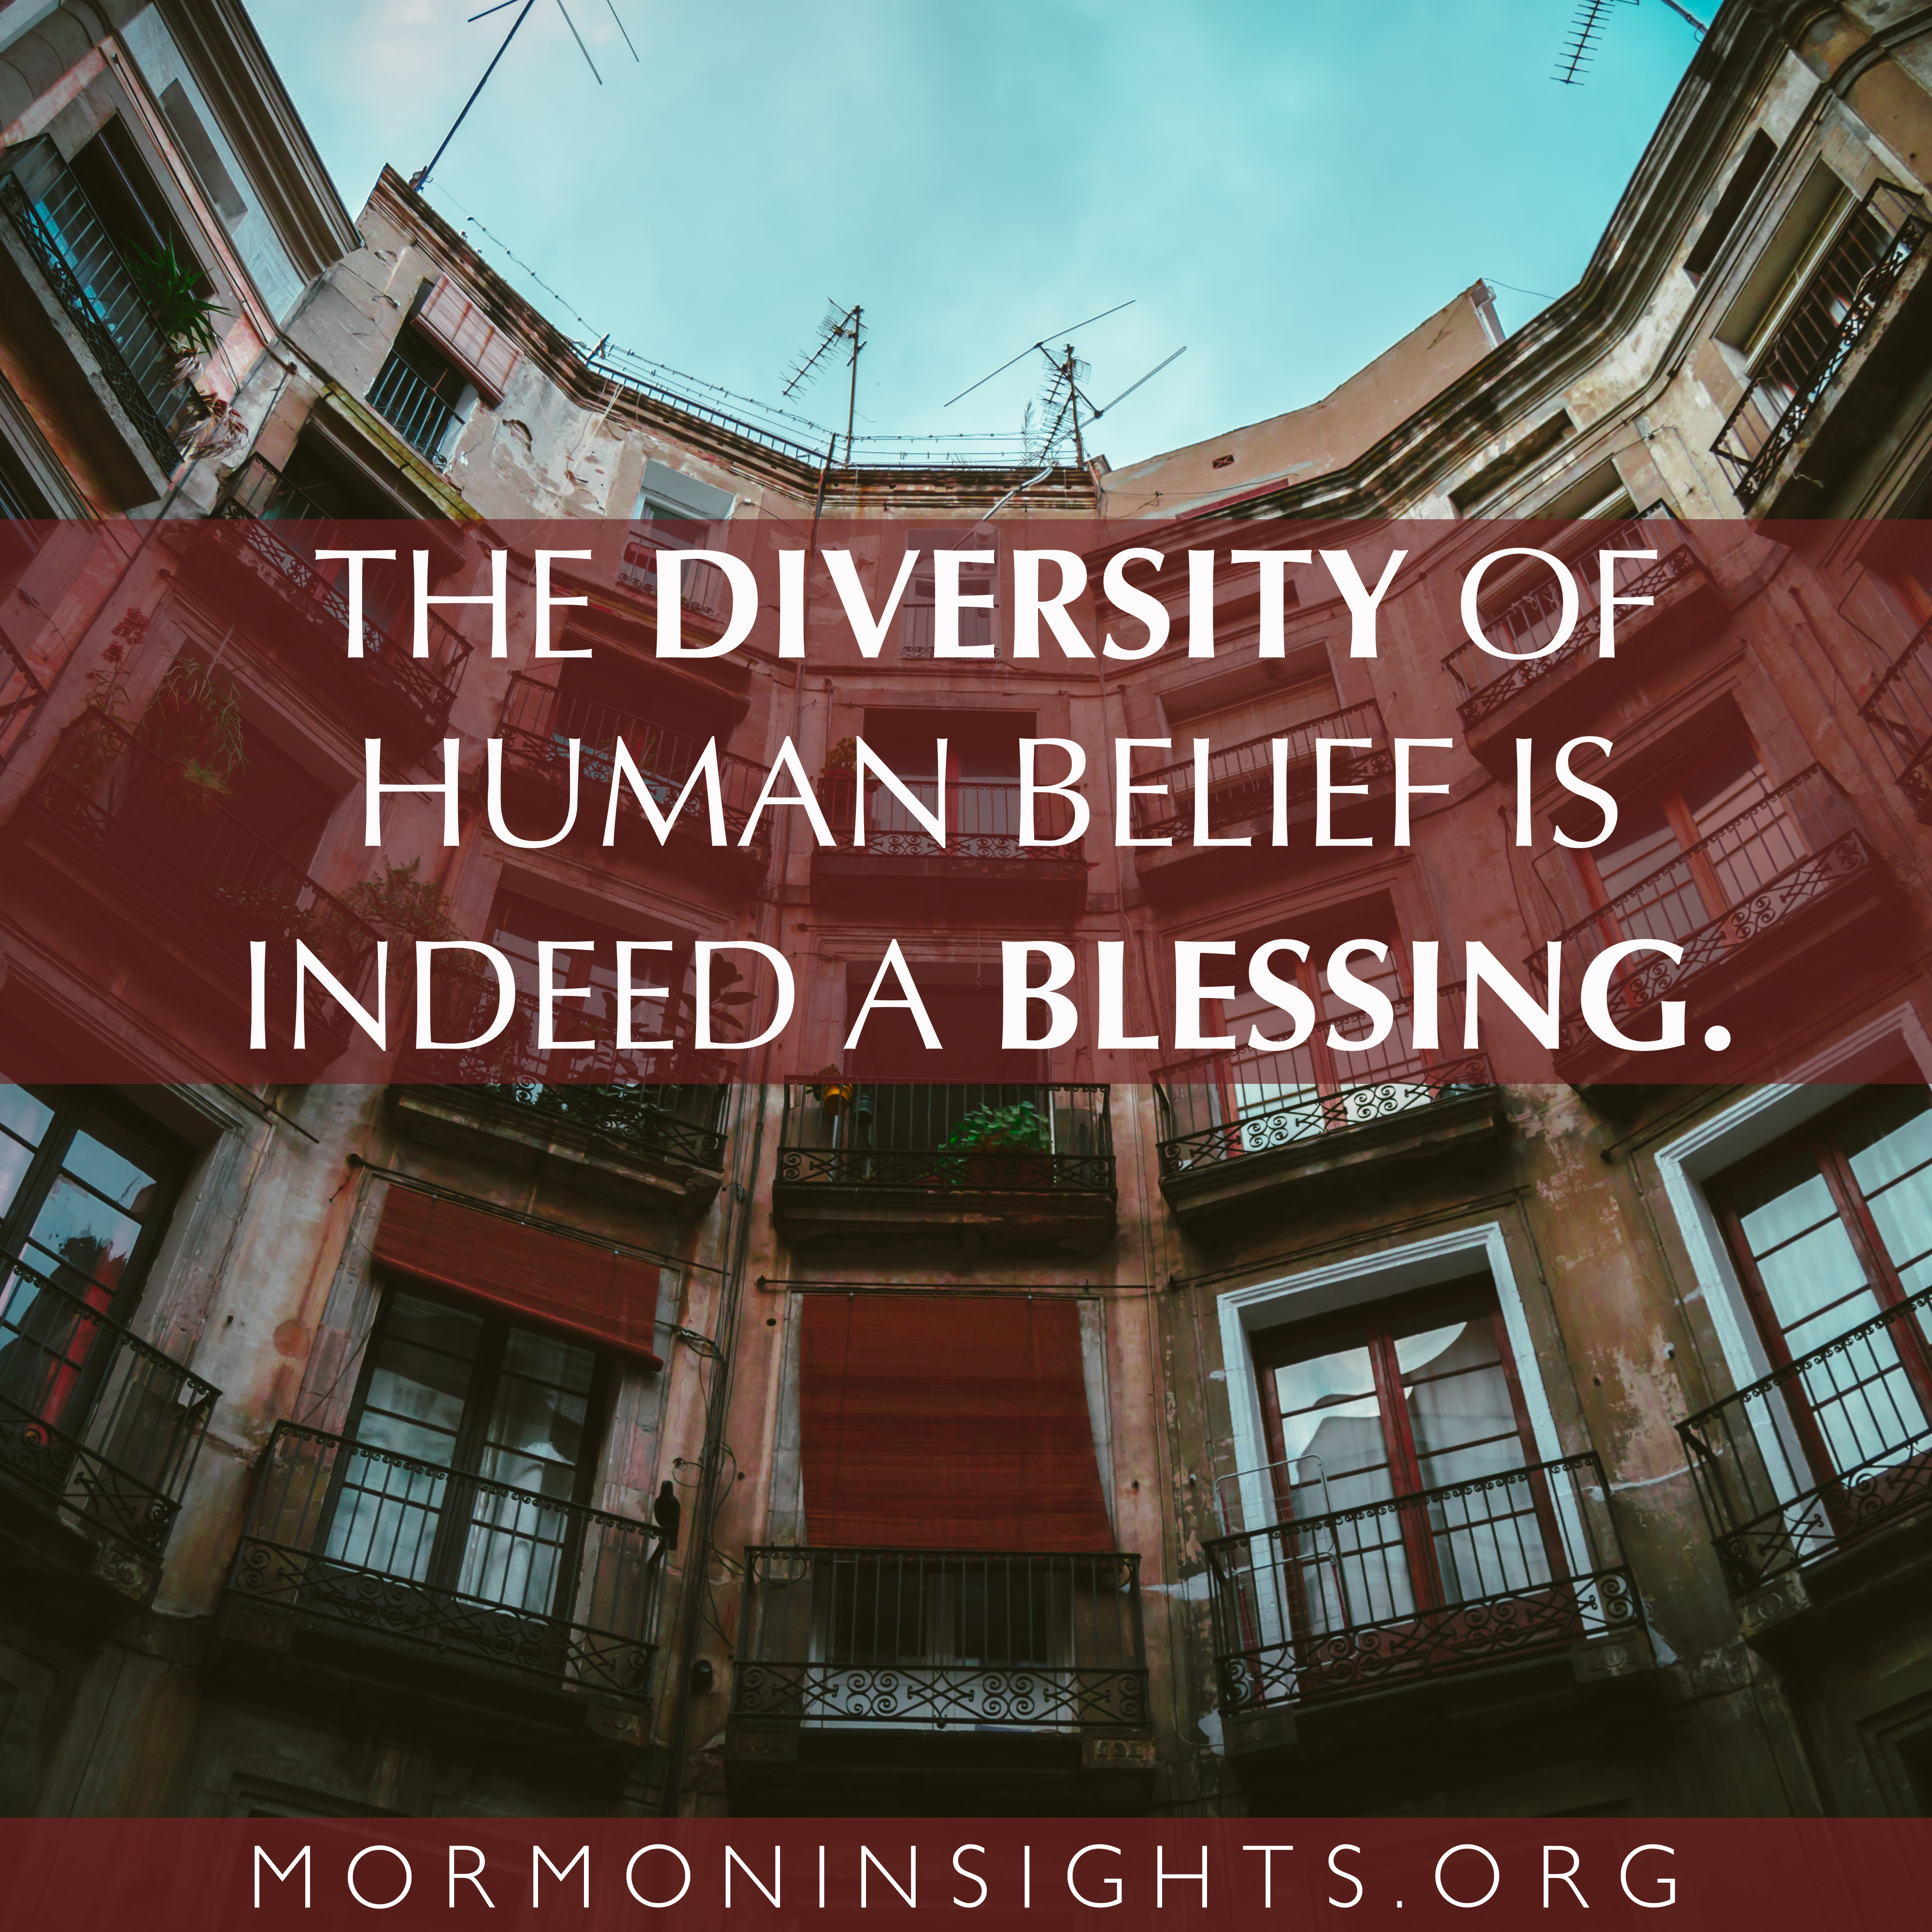 "The diversity of human belief is indeed a blessing." Quote is on a background of windows of an old apartment building